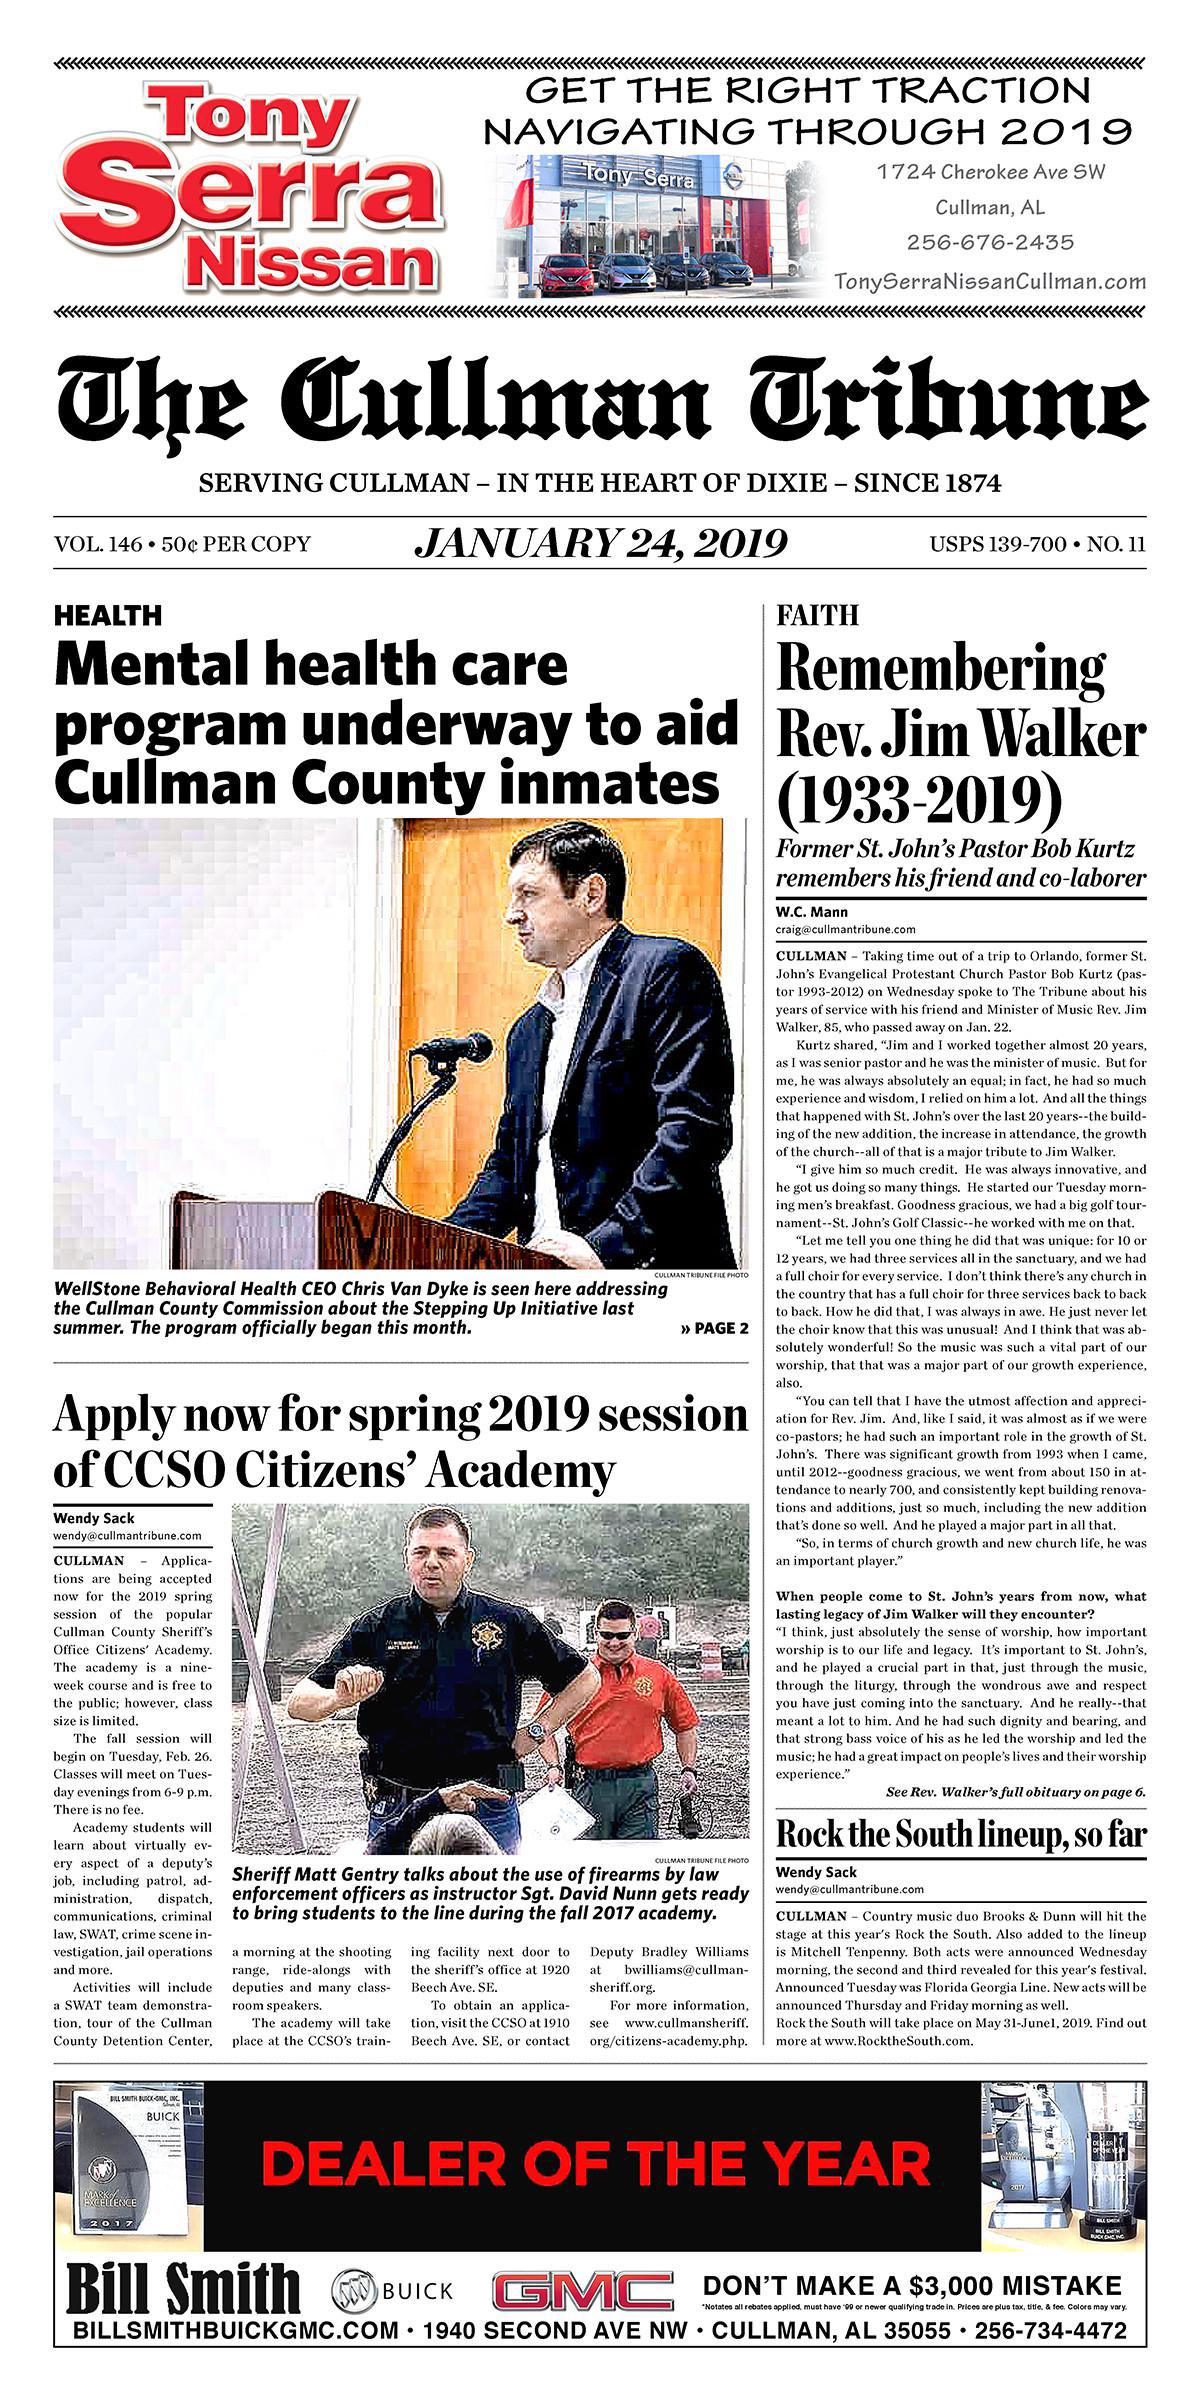 Good Morning Cullman! The 01-24-2019 edition of the Cullman Tribune is now ready to view